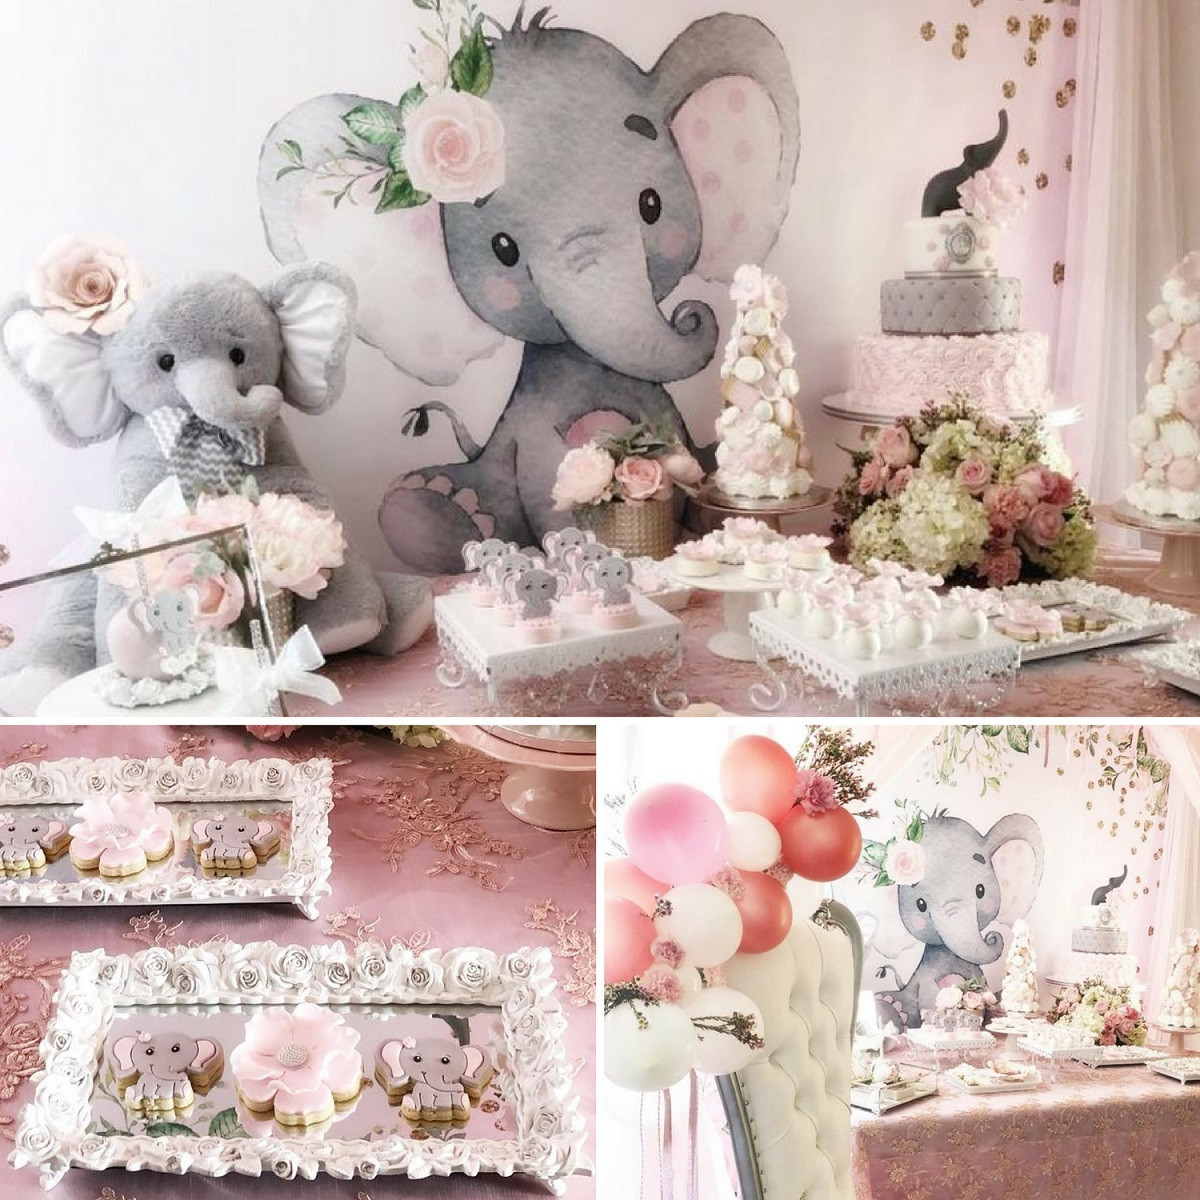 Baby Girl Elephant Decor
 Pink And Gray Elephant Baby Shower Baby Shower Ideas